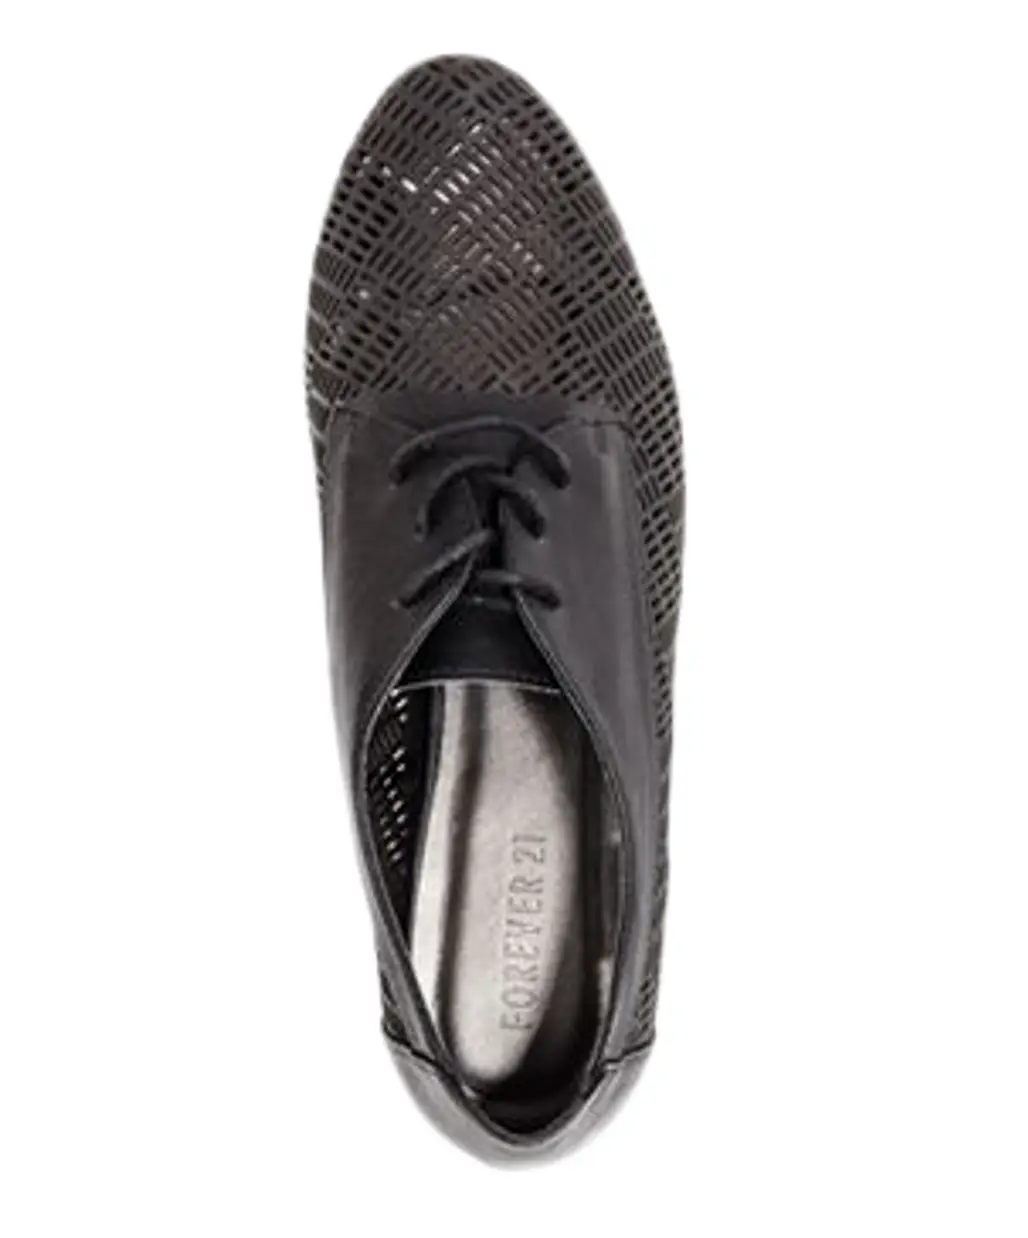 Perforated Oxfords